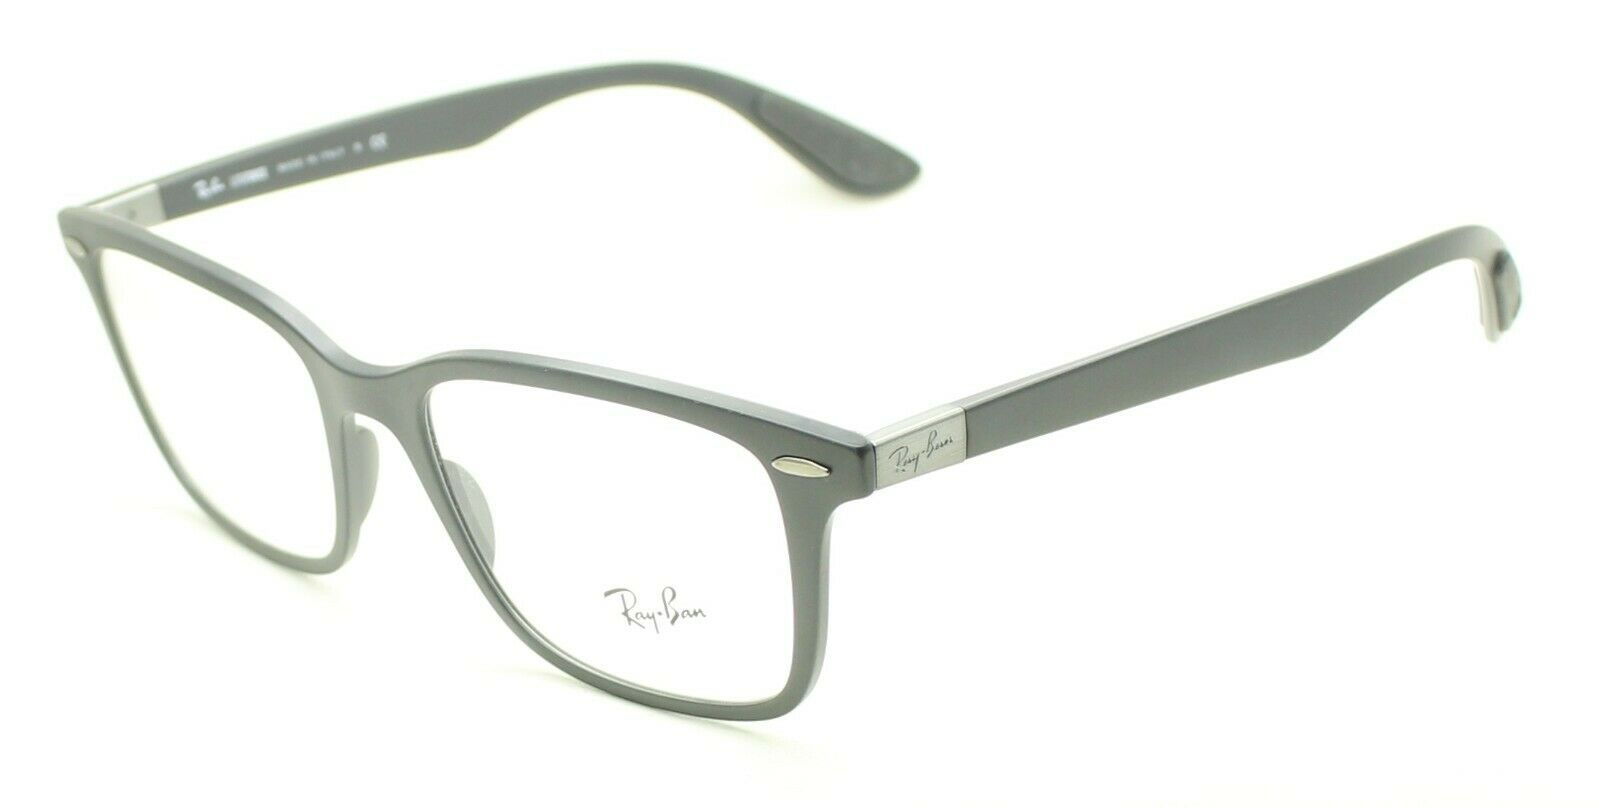 RAY BAN LITEFORCE RB 7144 5204 53mm RX Optical FRAMES RAYBAN Glasses New - Italy